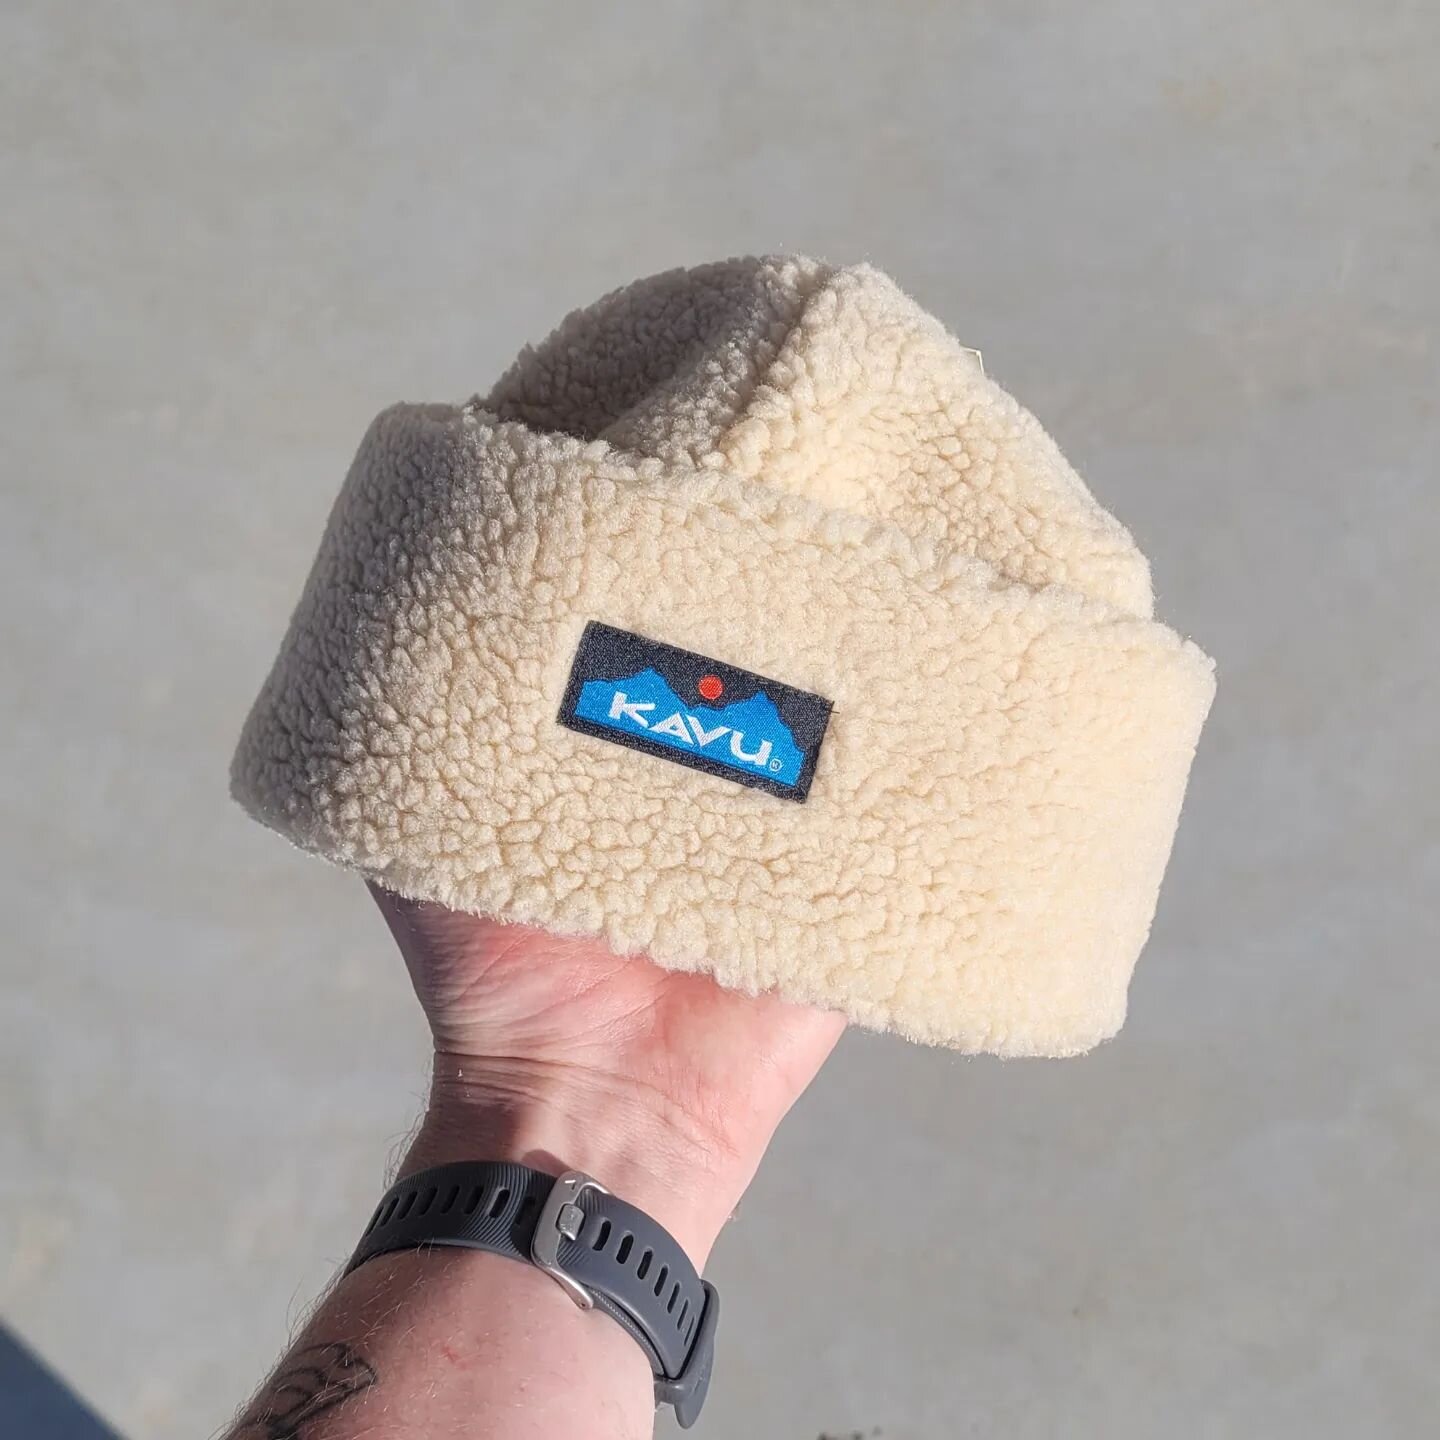 The @kavu Unicorn Farm has once again brought you a hat that will keep your head warm and bring magic everywhere you go.

Don't be alarmed if your friends start to pet your head -- the Fur Ball Beanie is cuddly!

#KAVU #FUNHASNOSEASON #BUSYLIVIN #LOC